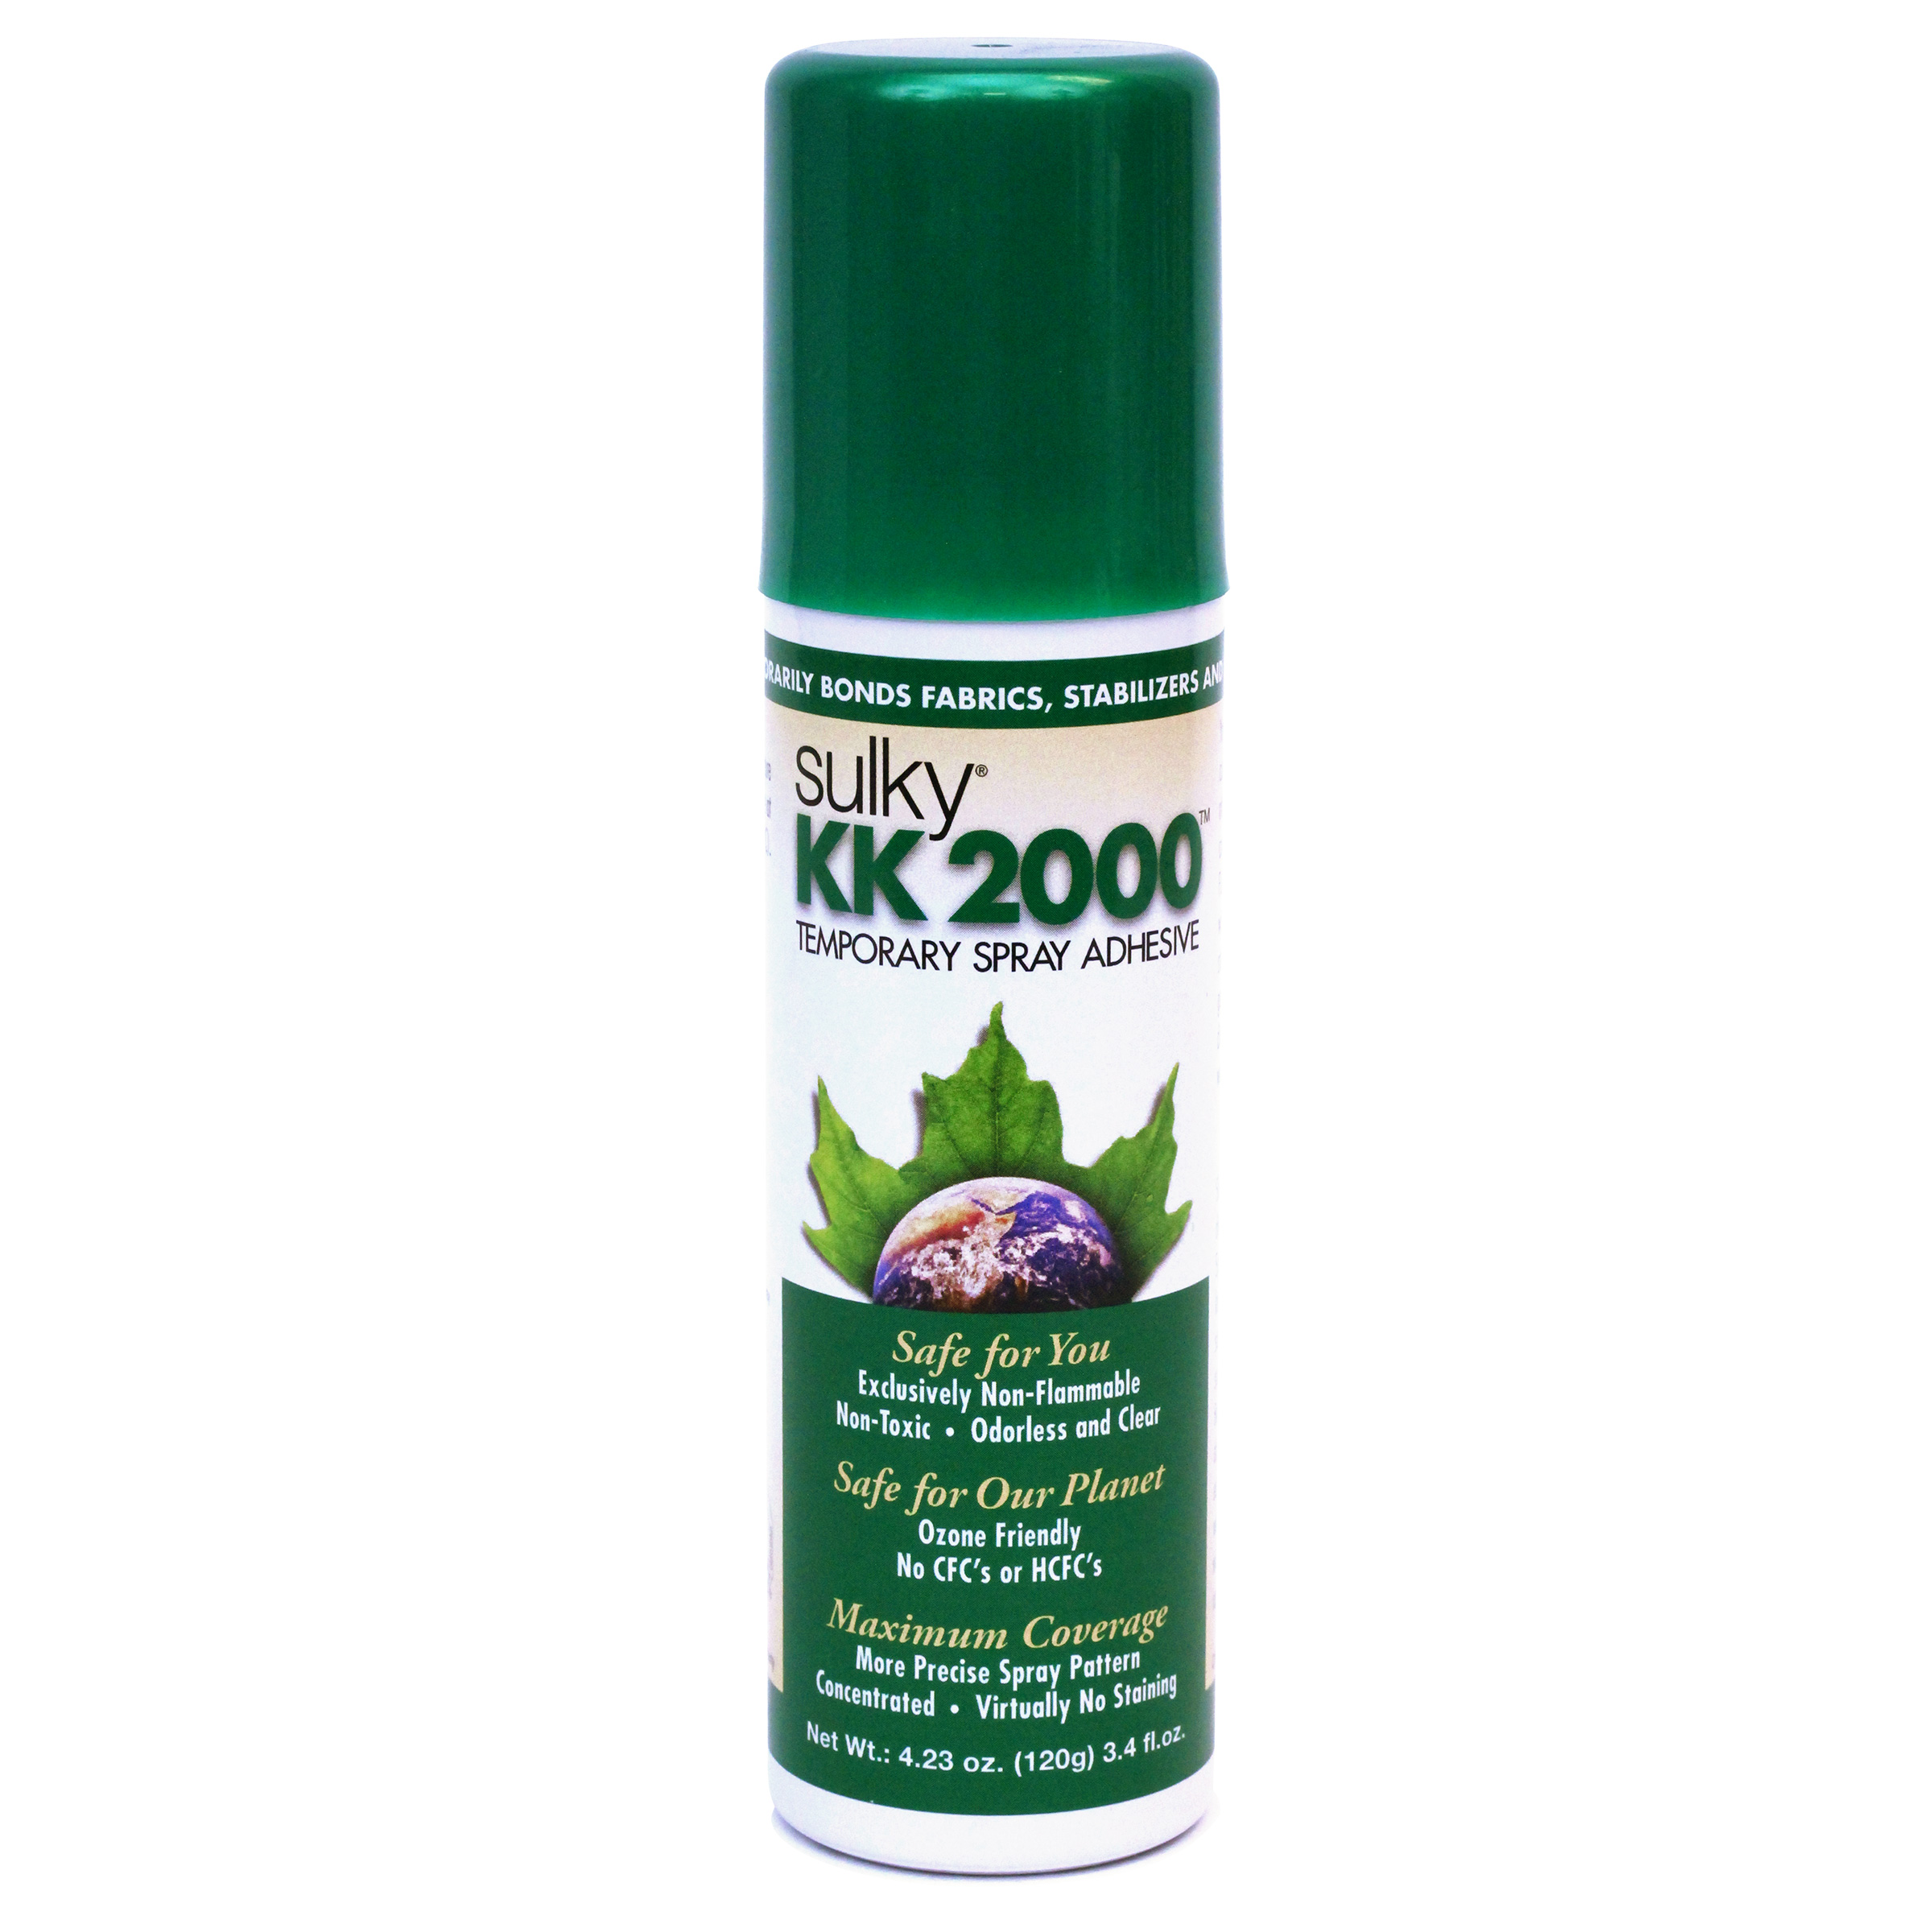 How can I combine Sulky KK 2000 Temporary Spray Adhesive (not water soluble) and Sulky Solvy or Super Solvy?